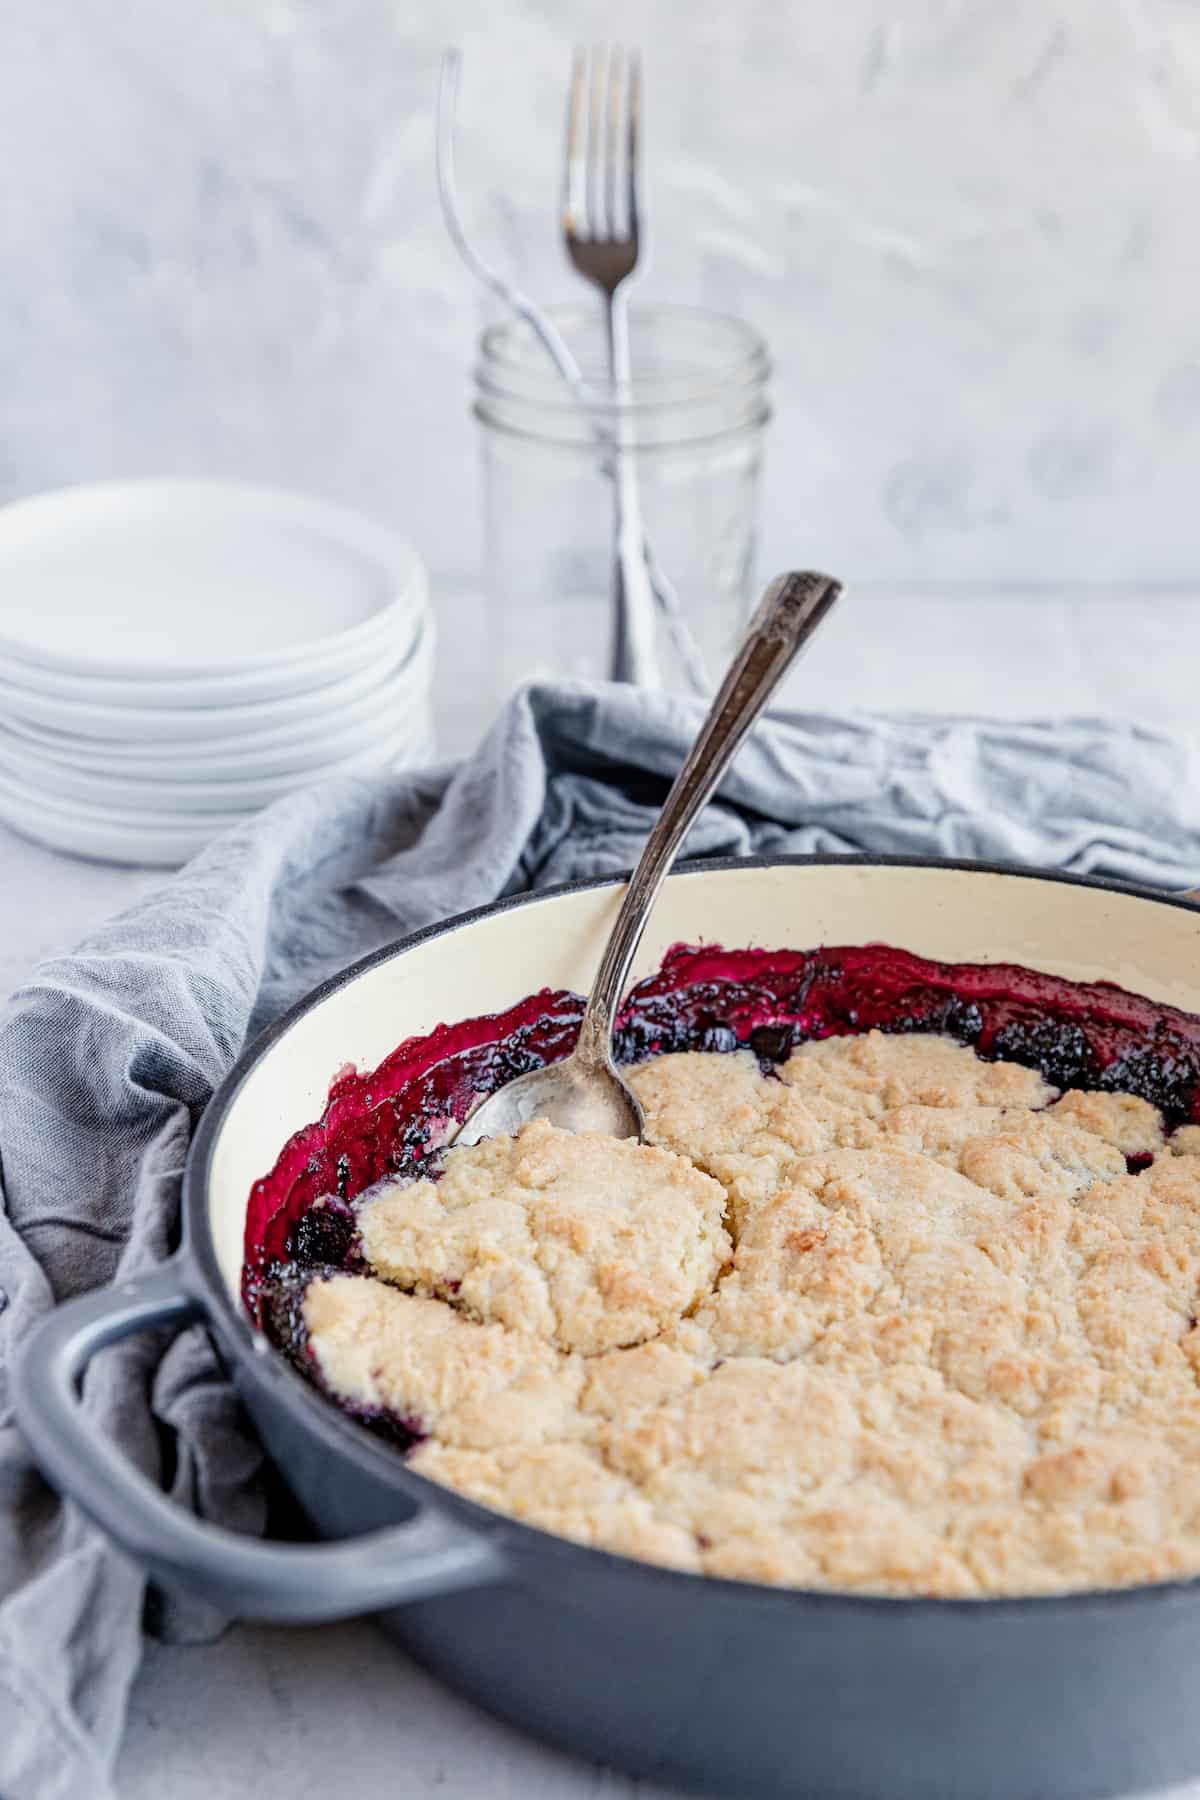 A Freshly Made Blueberry Rhubarb Cobbler in a Pan with a Metal Spoon Digging Into the Dessert